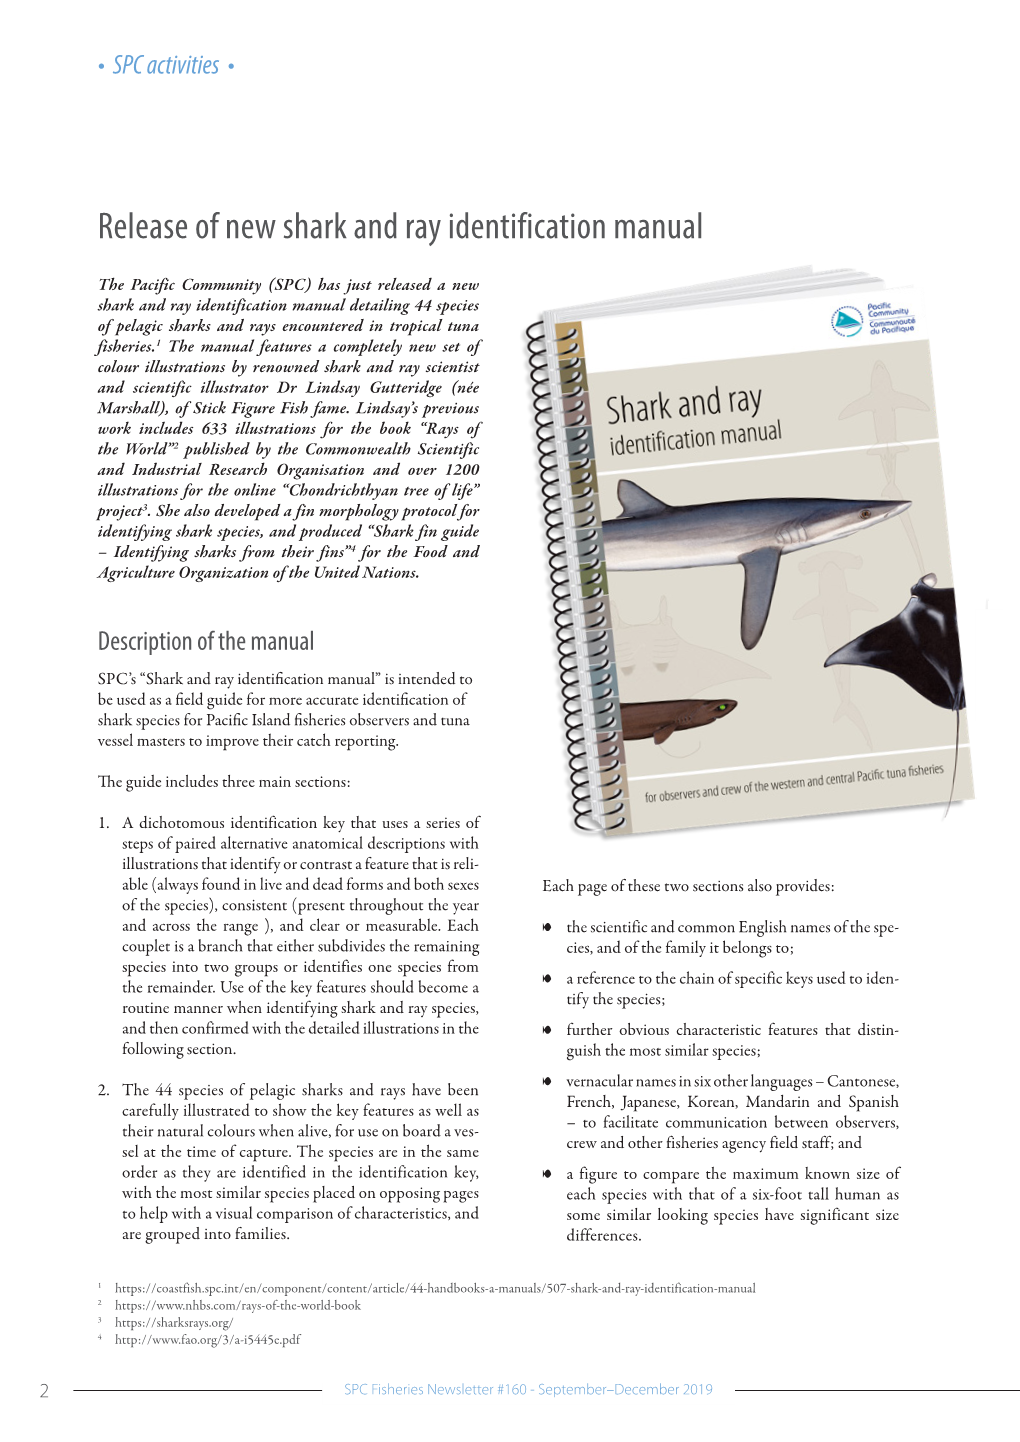 Release of New Shark and Ray Identification Manual